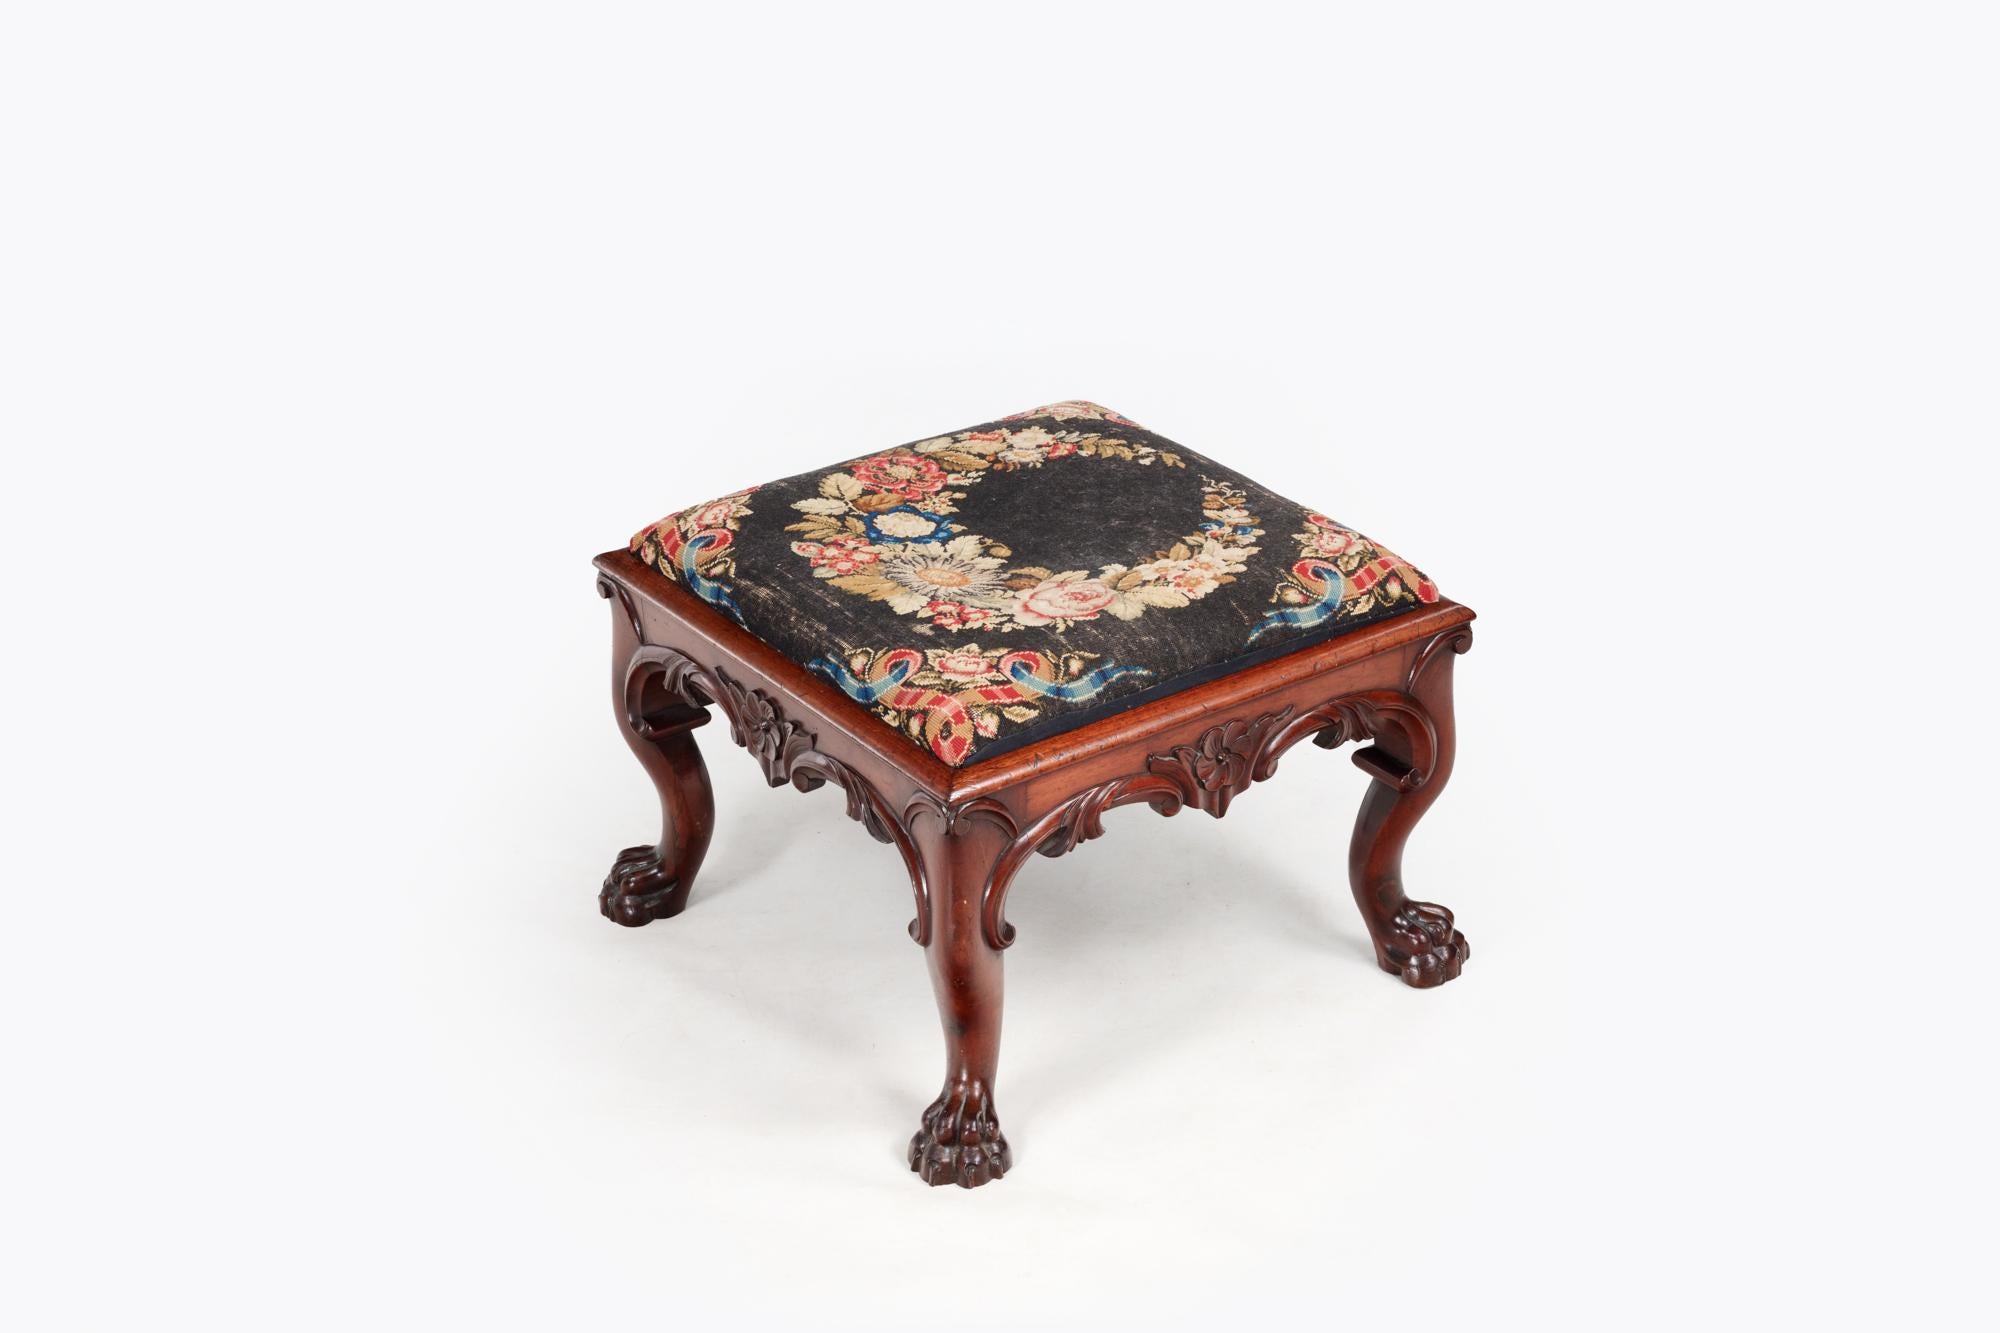 19th Century Irish mahogany square footstool with tapestry top terminating on hairy paw feet. The weight and detail of the wood carving strongly indicates that it is likely a piece produced after Robert Strahan. Circa 1830.